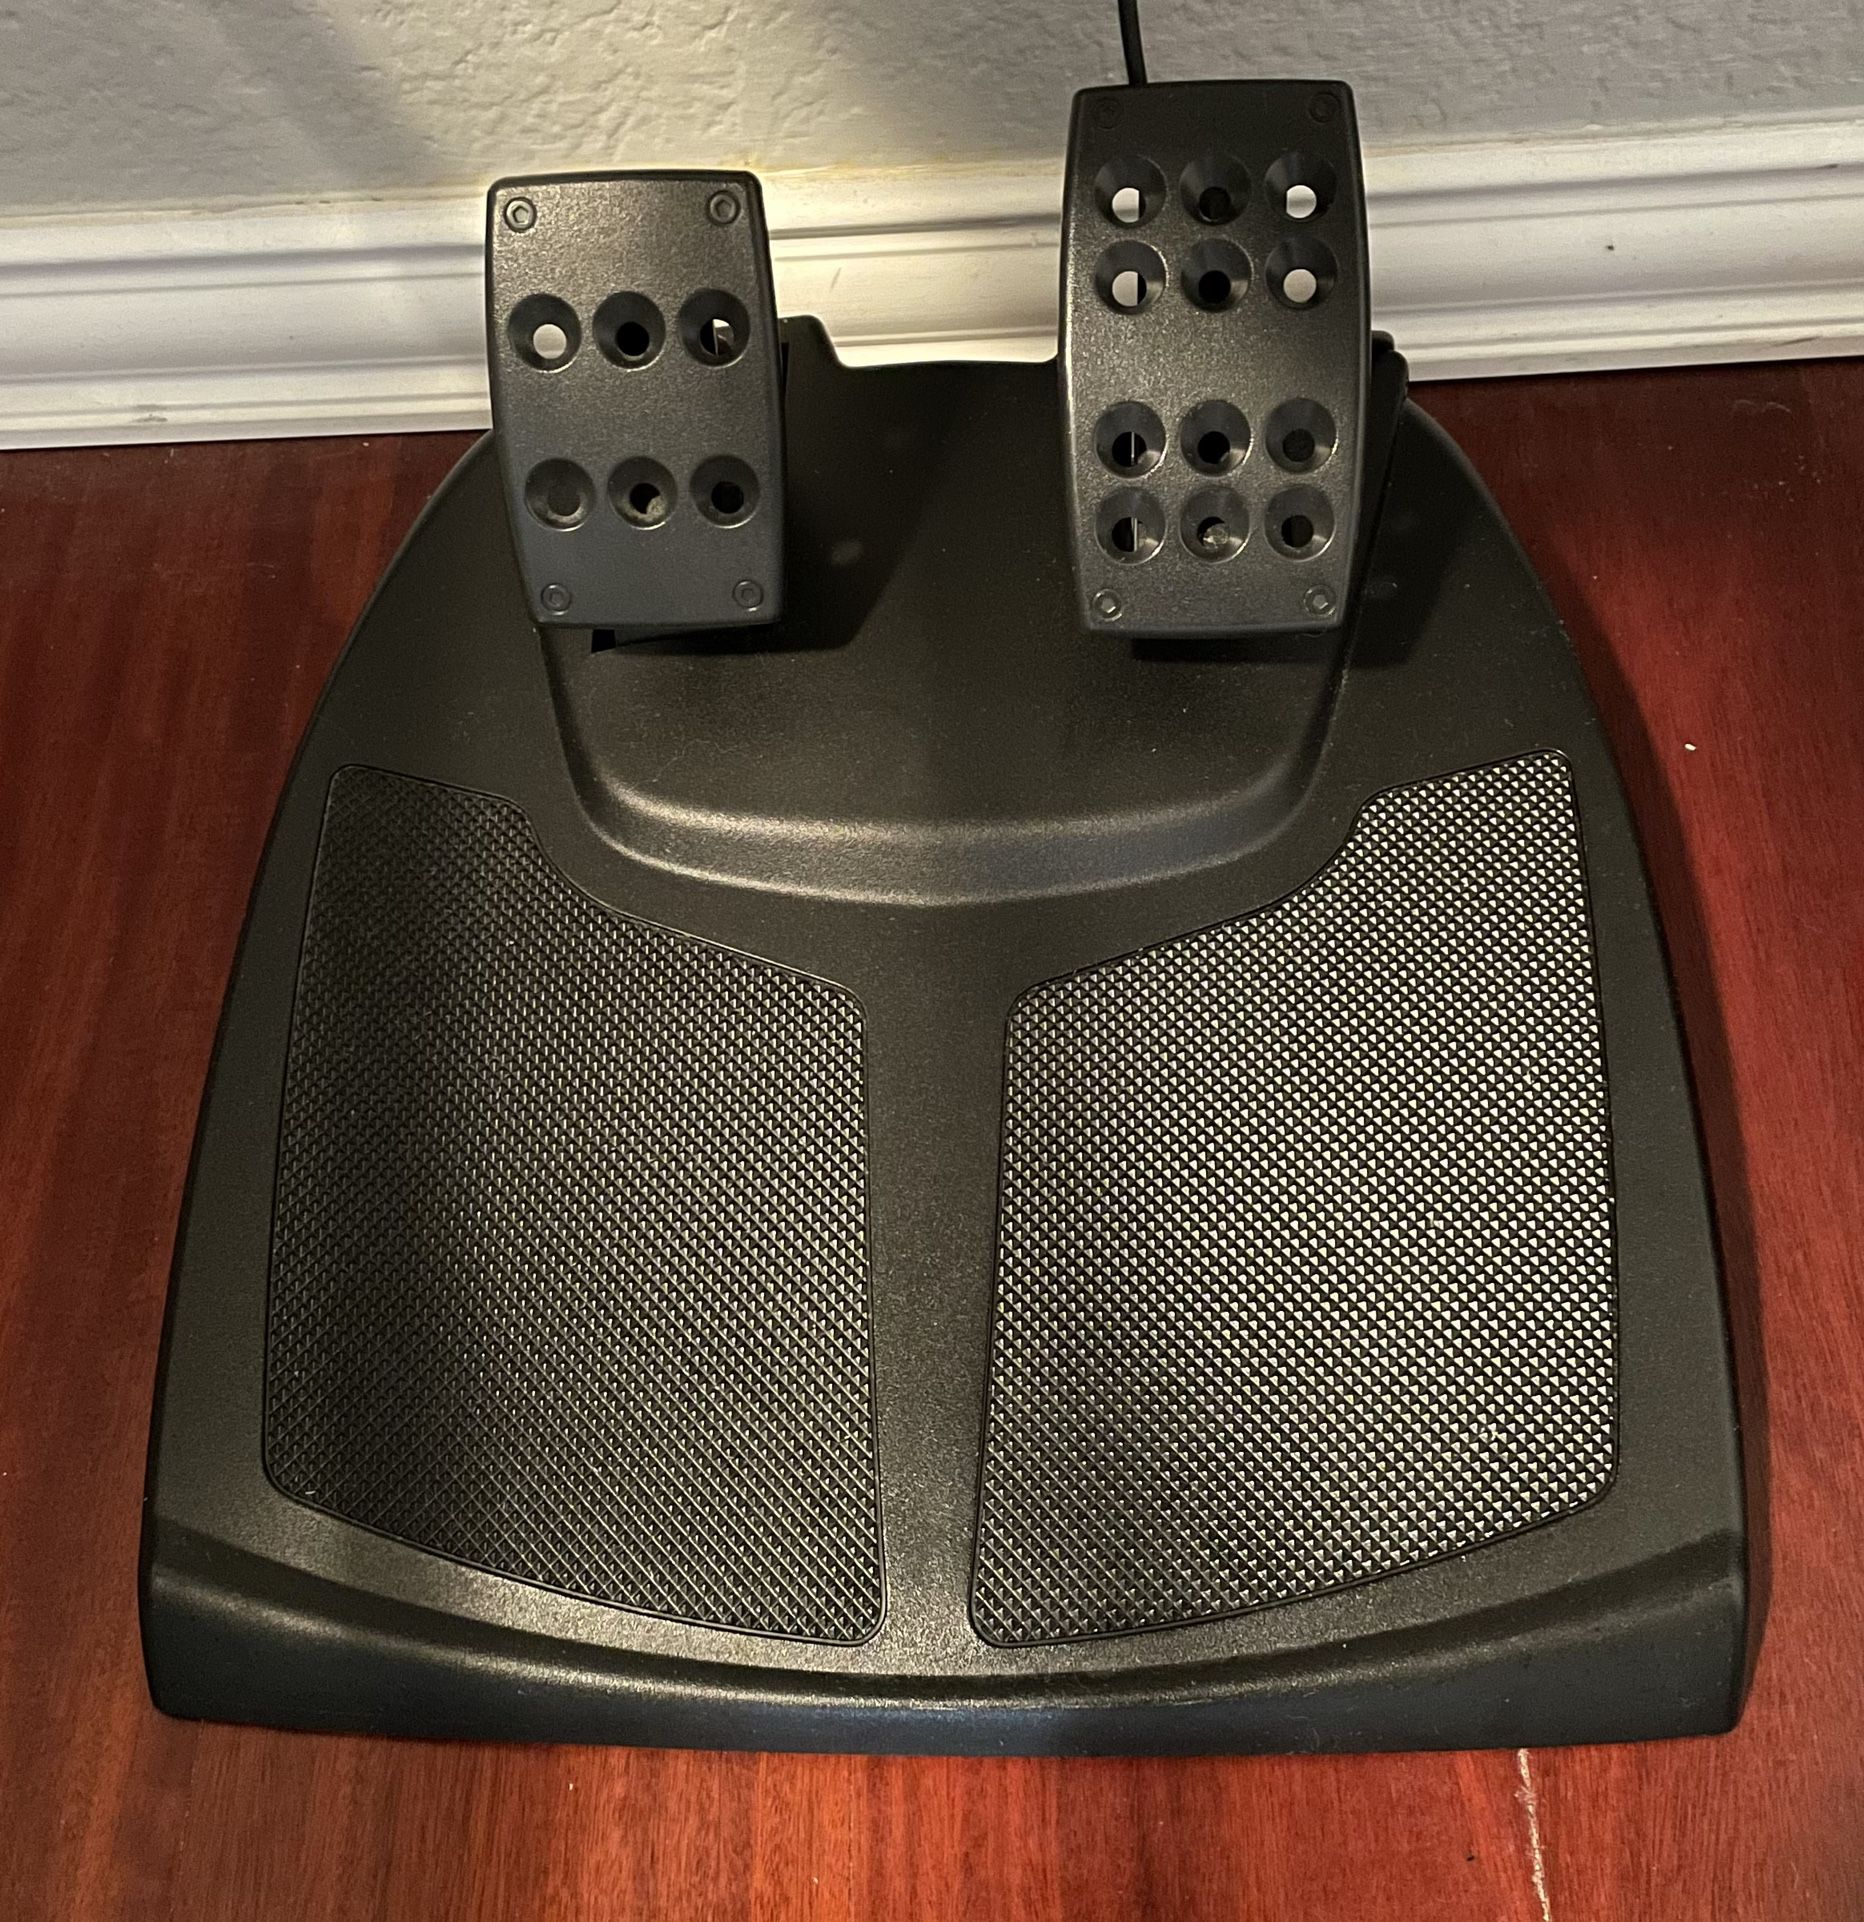 Unopened Logitech G27 Wheel Pedal for PS2 PS3 PC for Sale in Renton, WA -  OfferUp